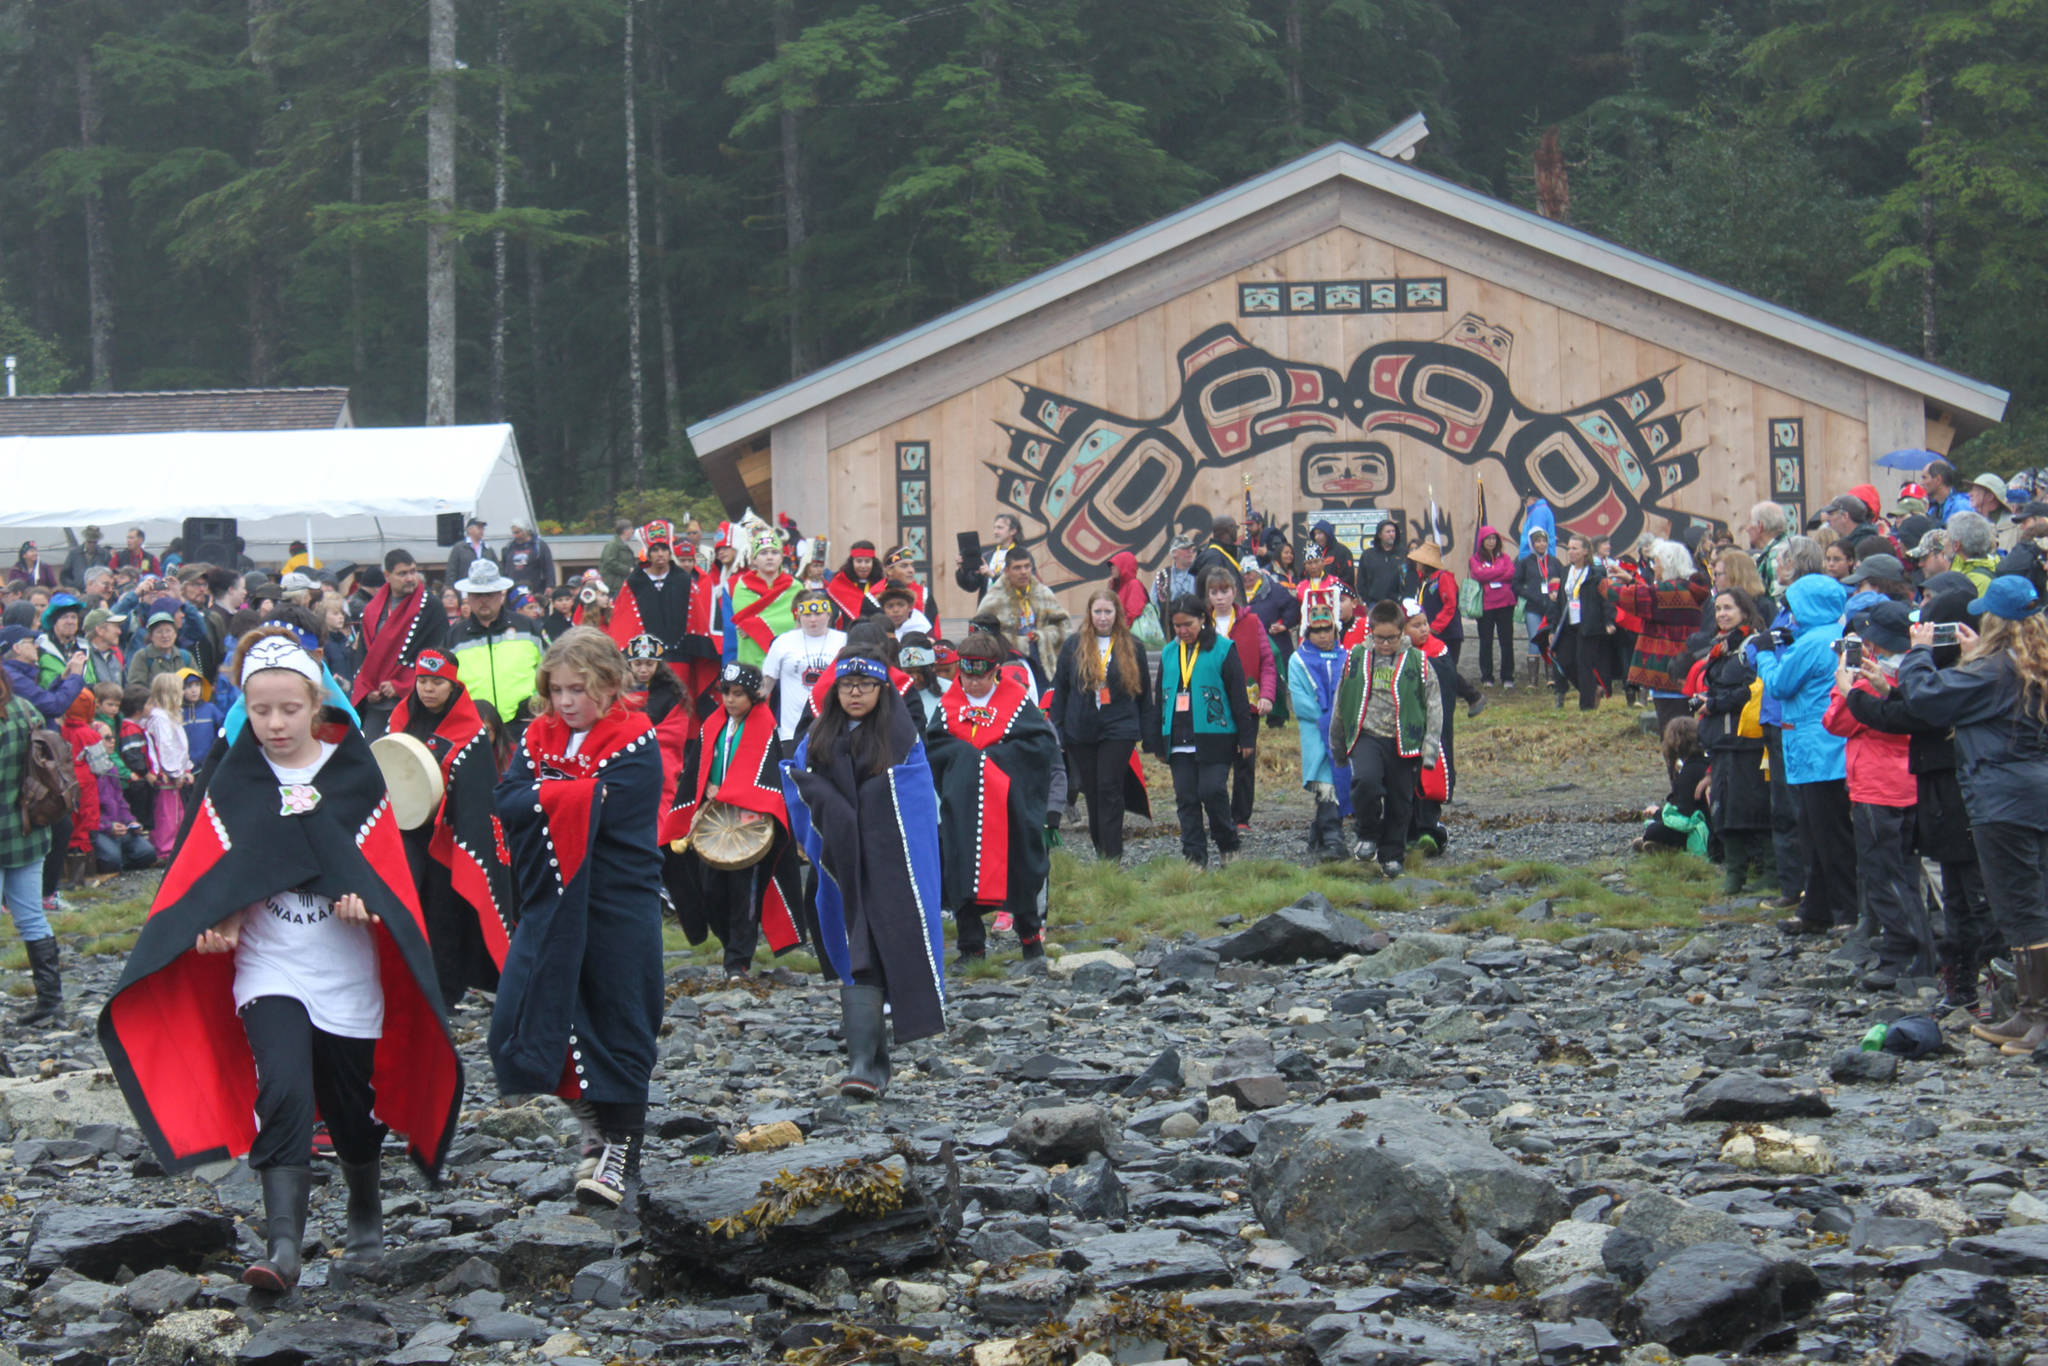 Students frp, Hoonah City Schools walk down to Bartlett Cove’s shore on Aug. 25, 2016 to meet the canoes that paddled into Glacier Bay from Hoonah. Mary Catharine Martin | Capital City Weekly